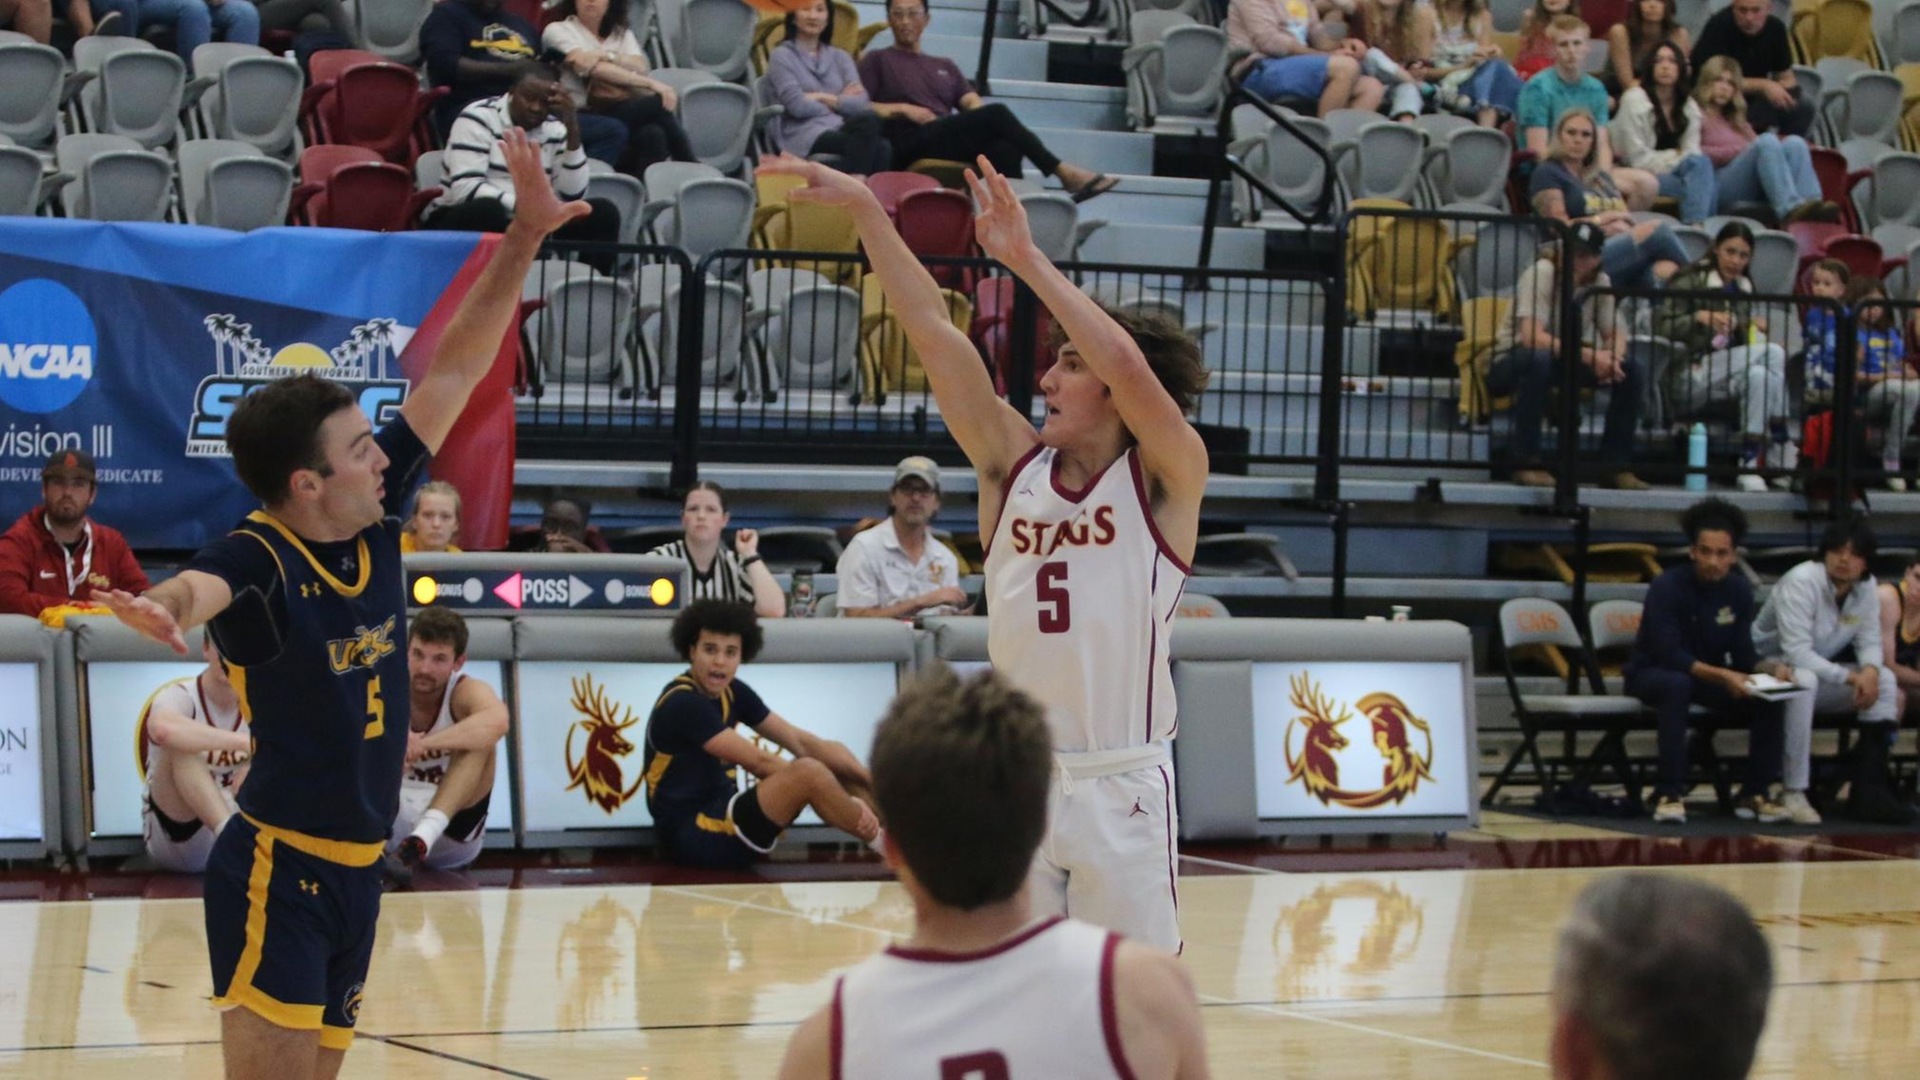 Reid Jones had 10 points for the Stags off the bench (photo by Ali McEachern)